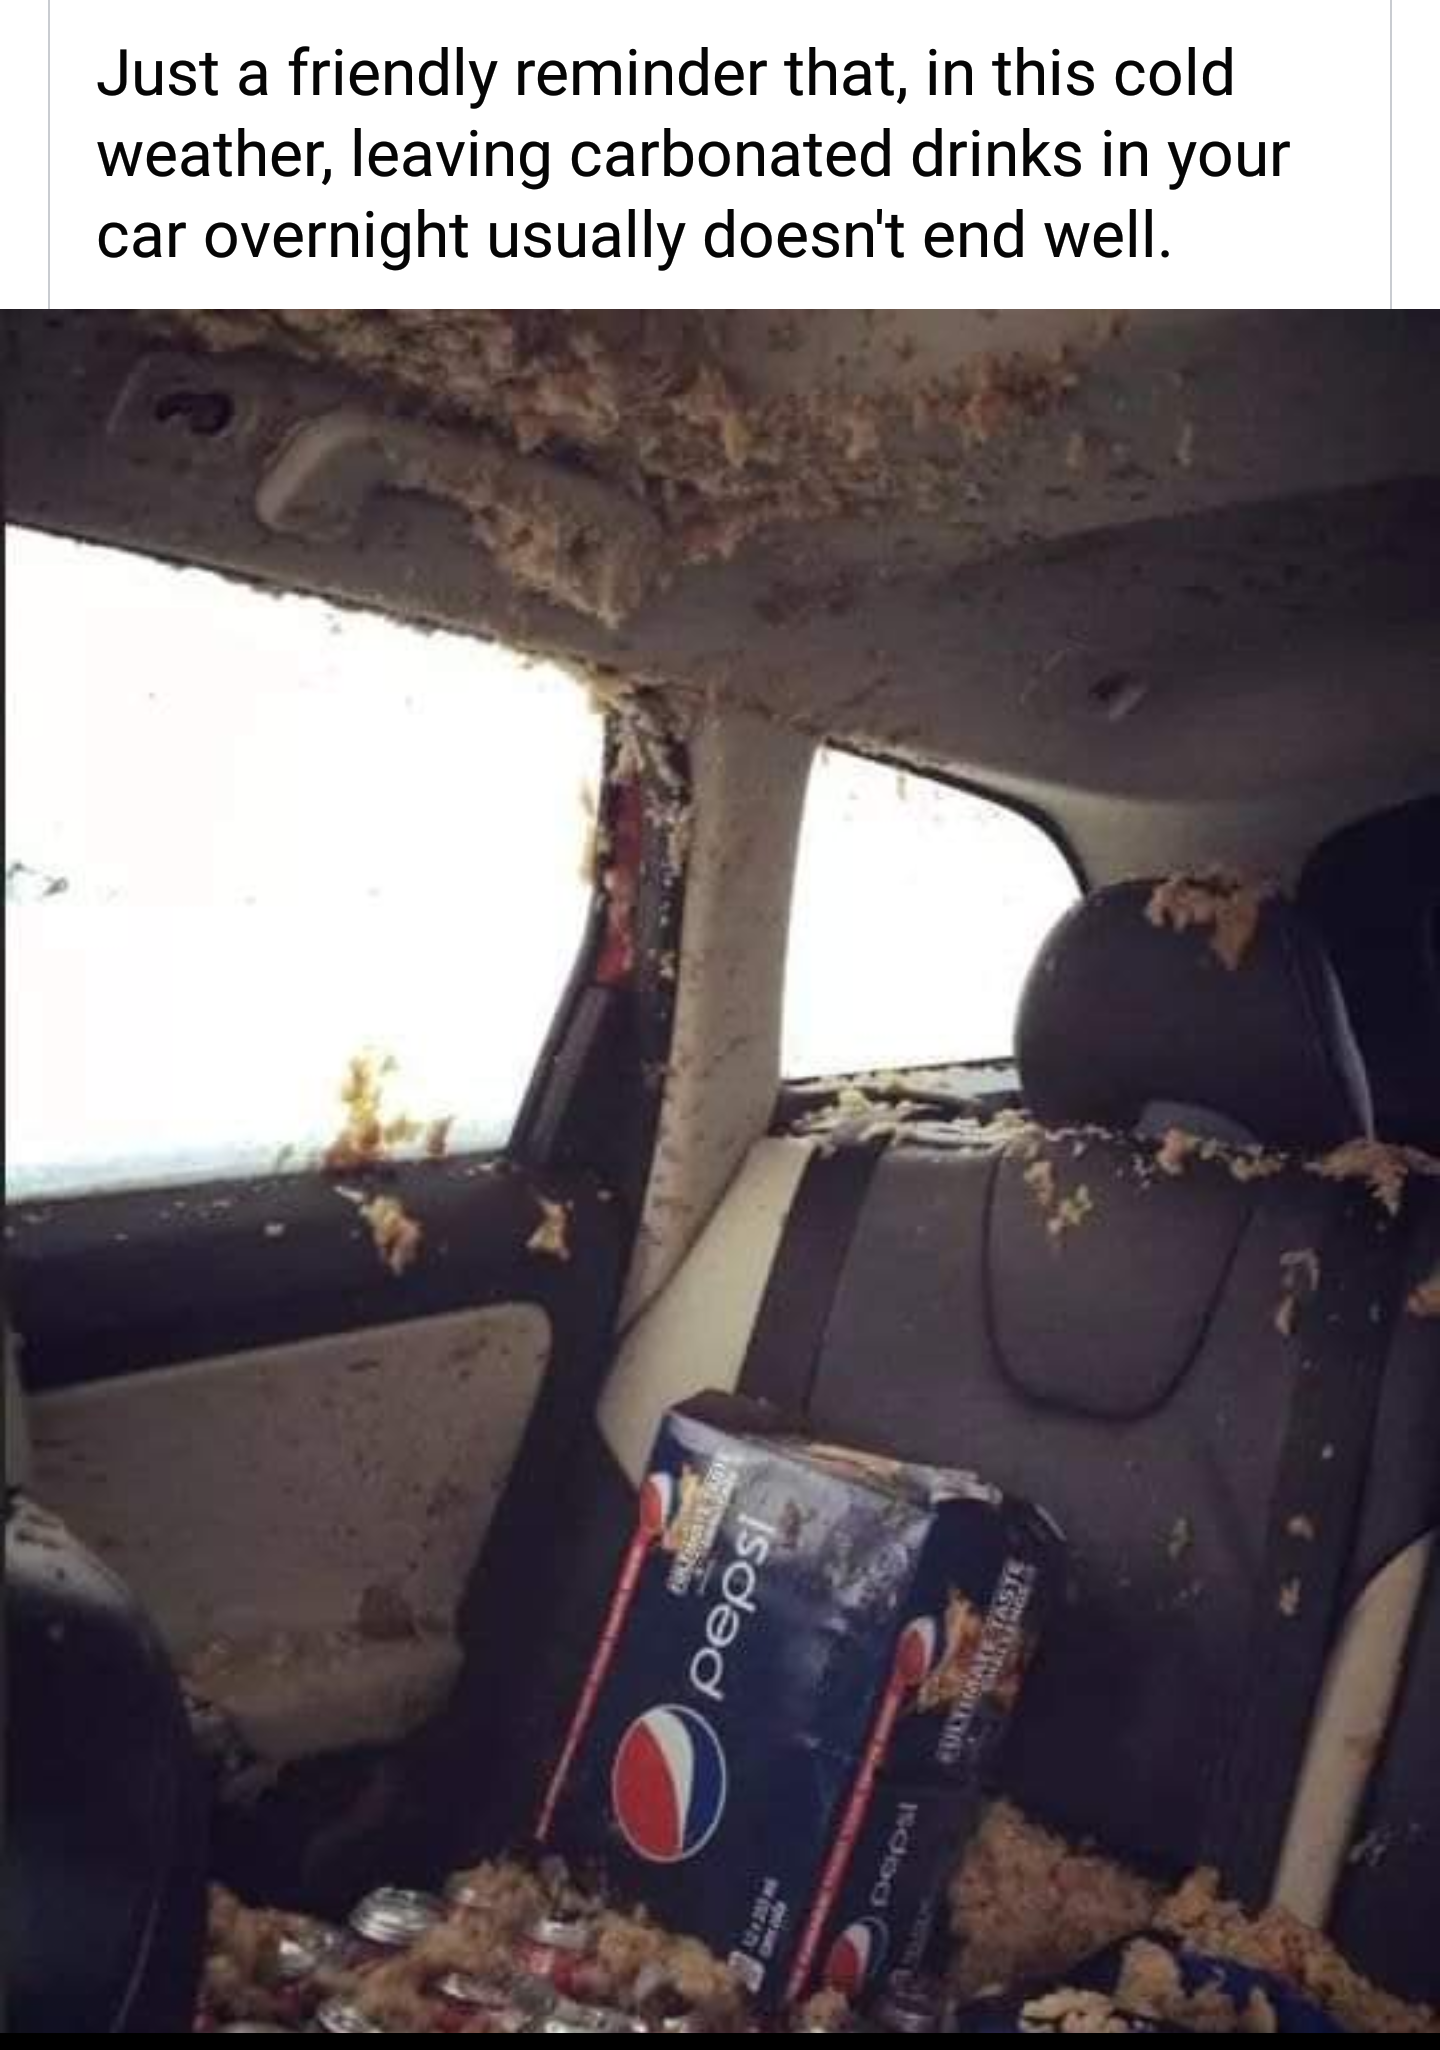 funny pictures - soda left in car - Just a friendly reminder that, in this cold weather, leaving carbonated drinks in your car overnight usually doesn't end well. isded